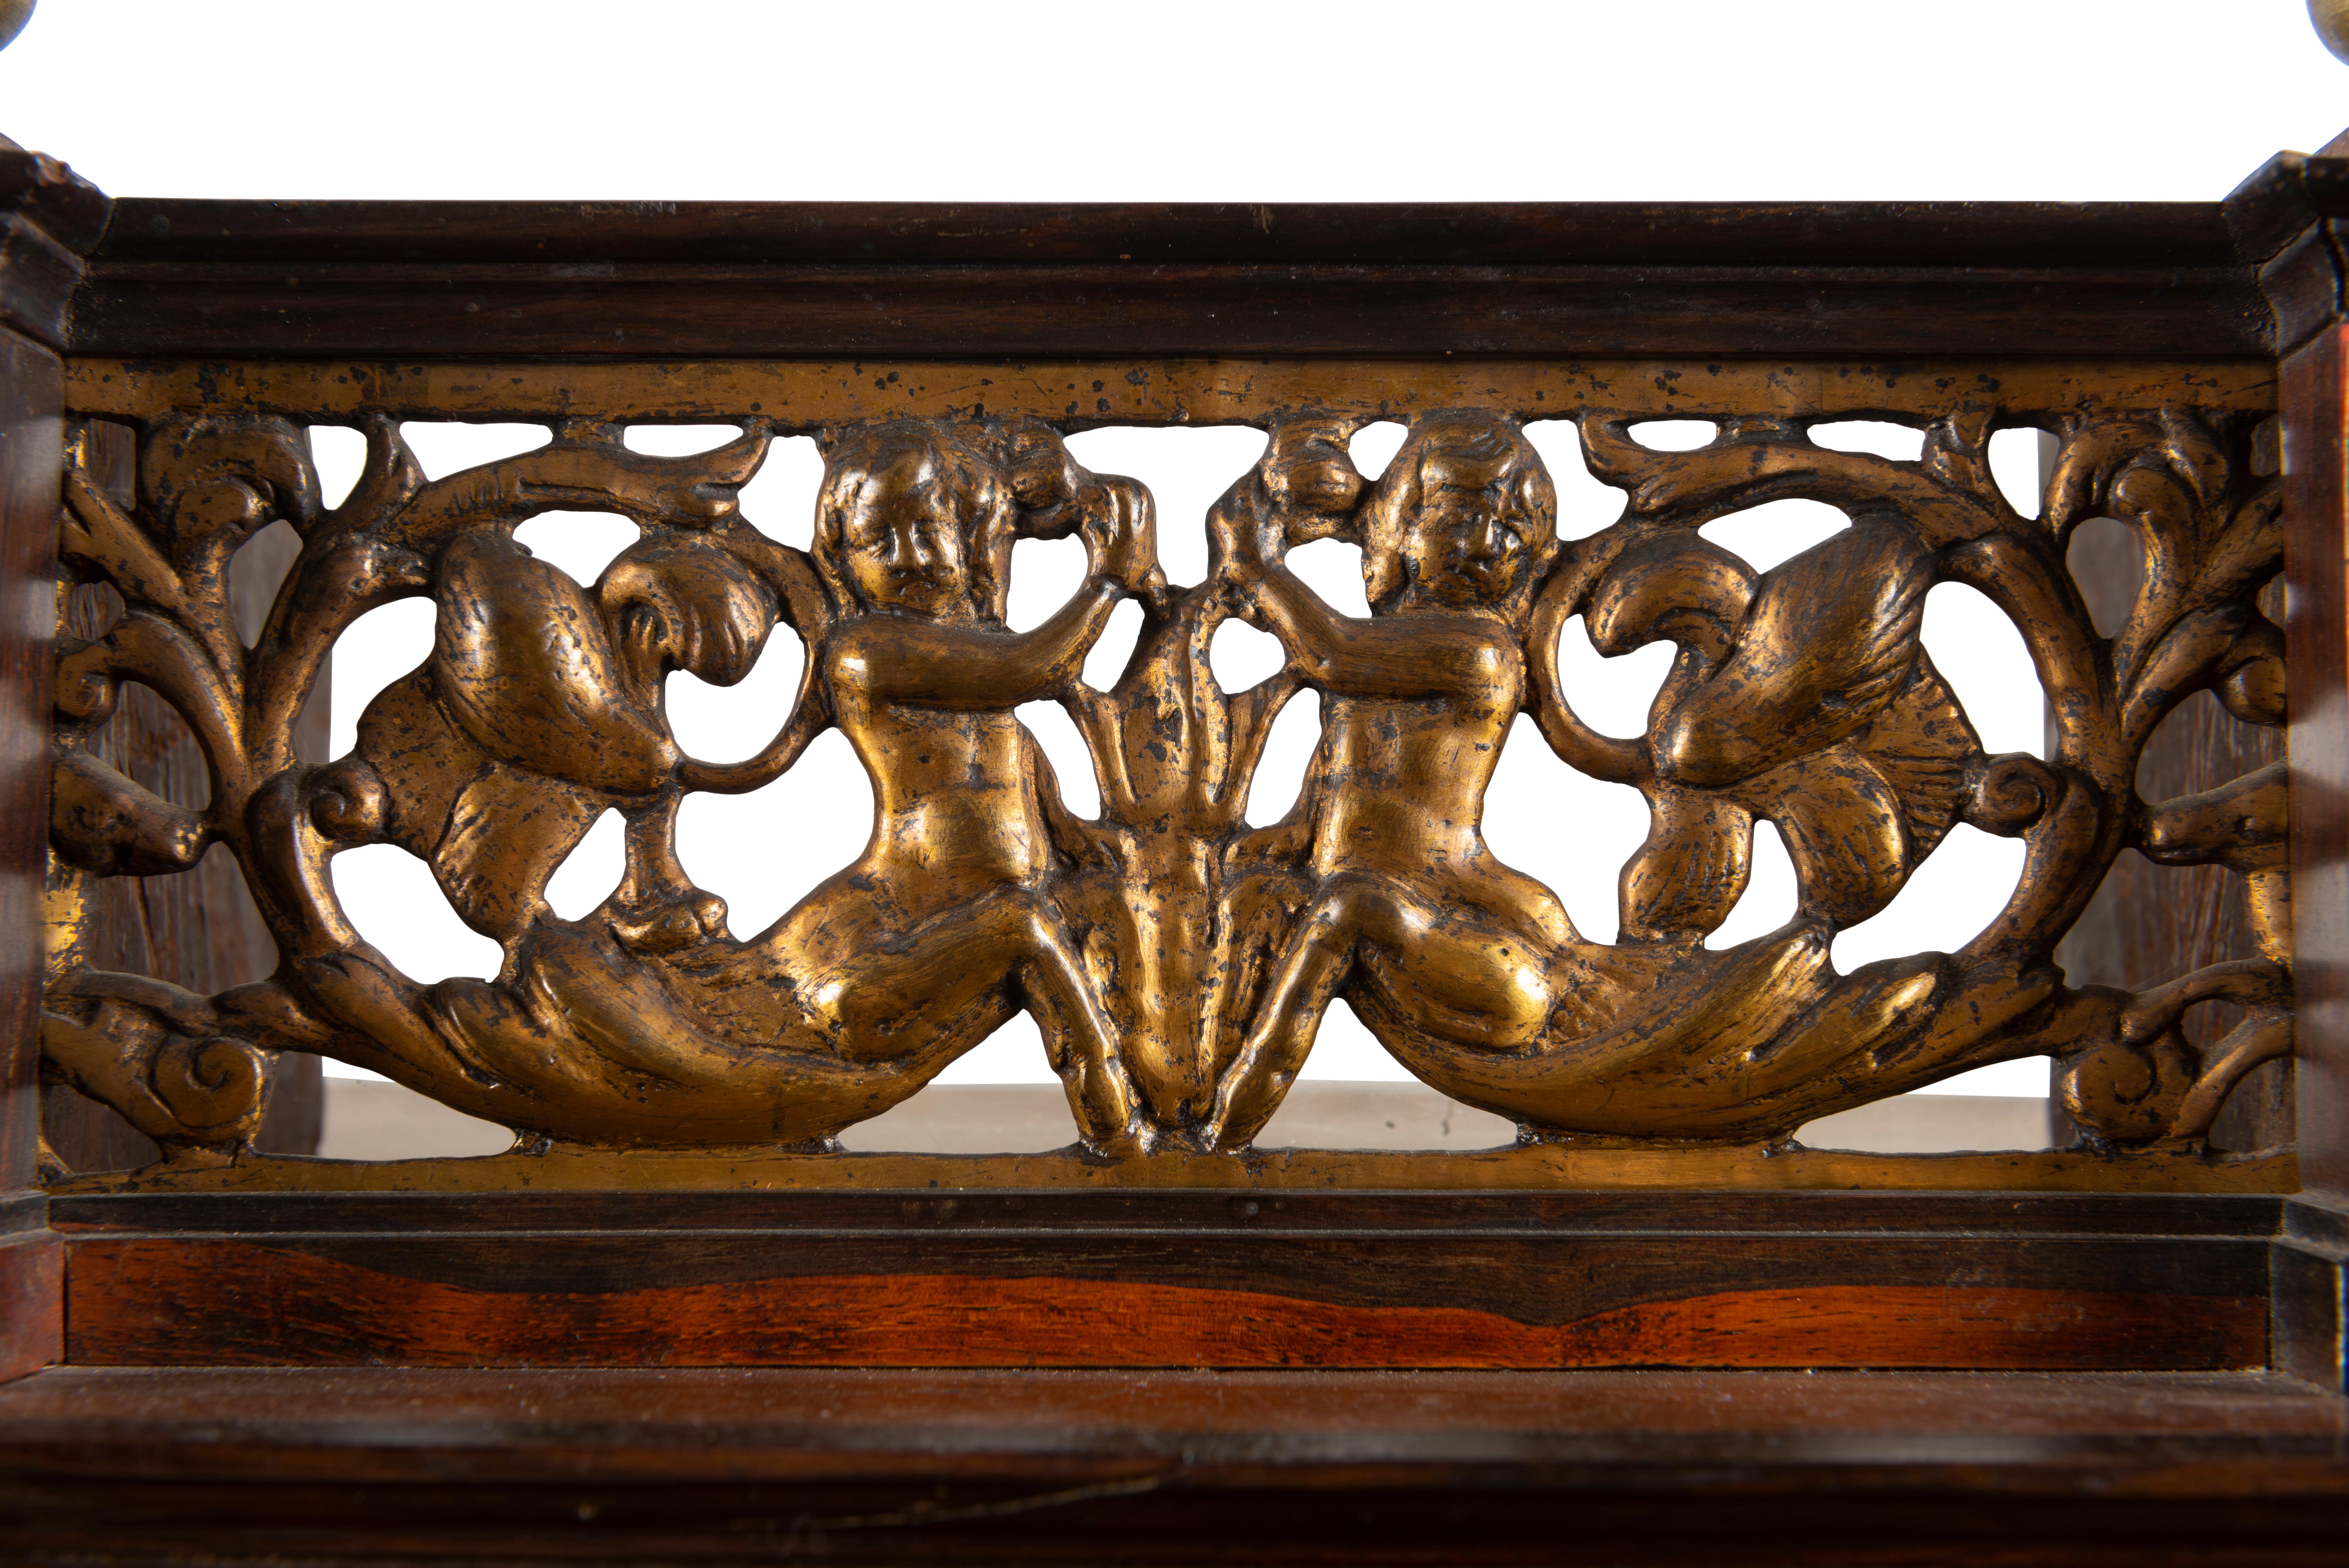 Baroque An Austro-Hungarian Late 17th-Early 18th Century Palisander Cabinet on Stand For Sale